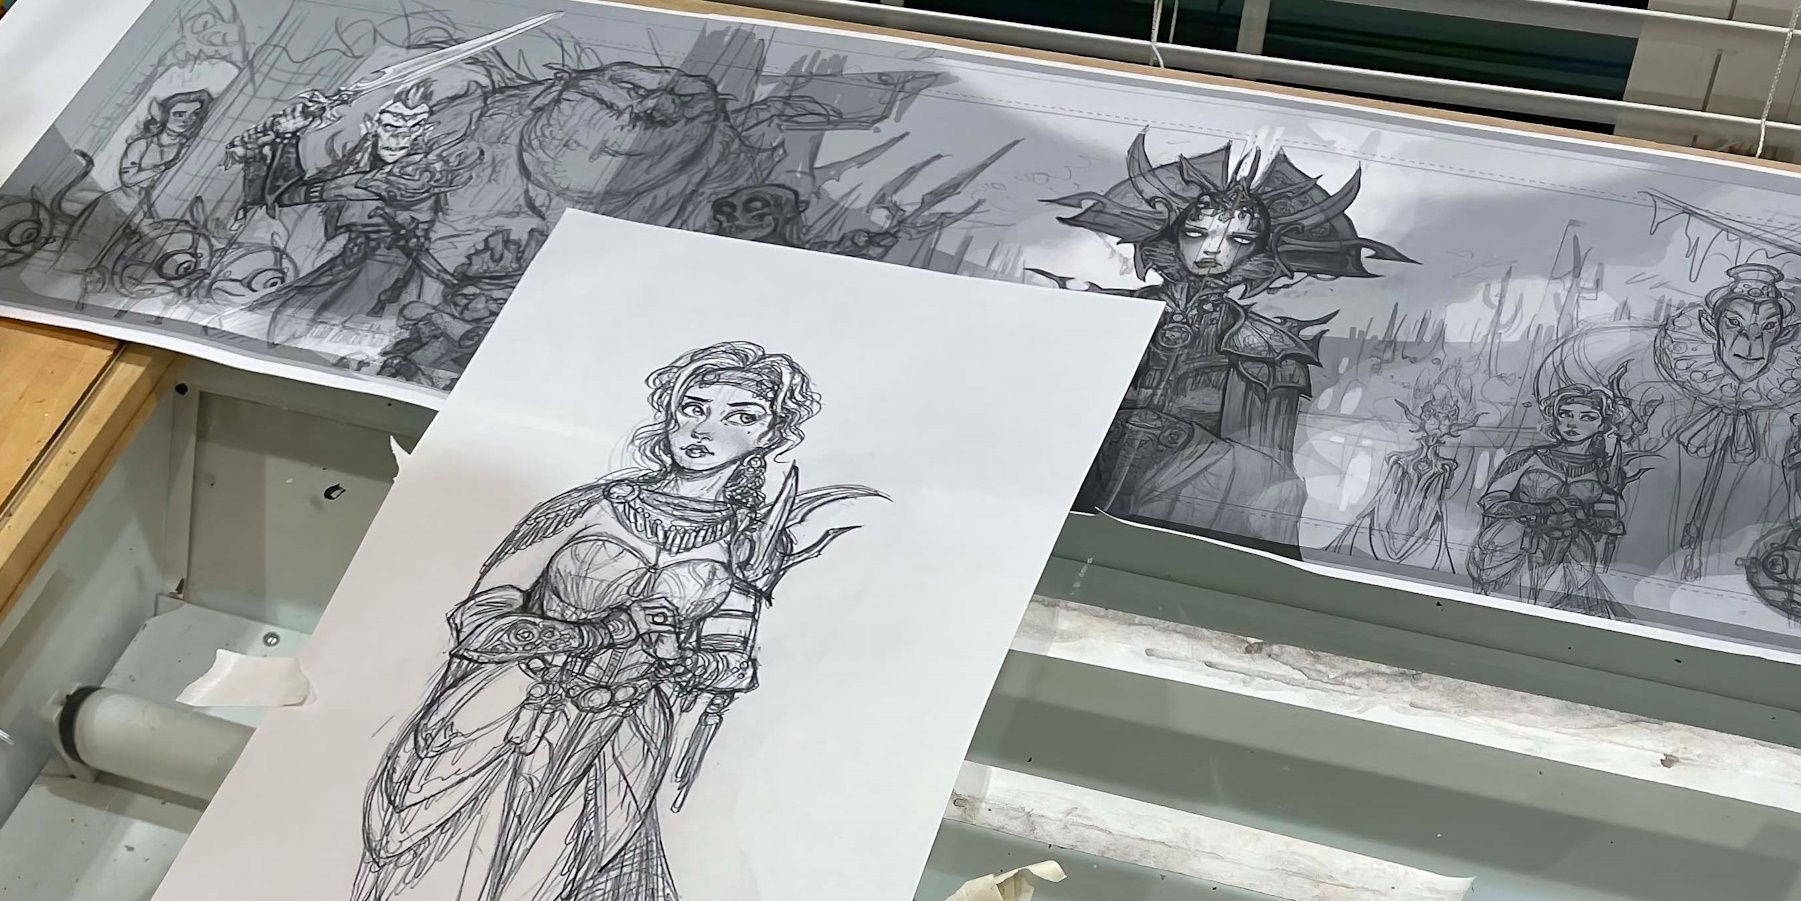 Tony DiTerlizzi sketches for the new DnD Planescape DM screen